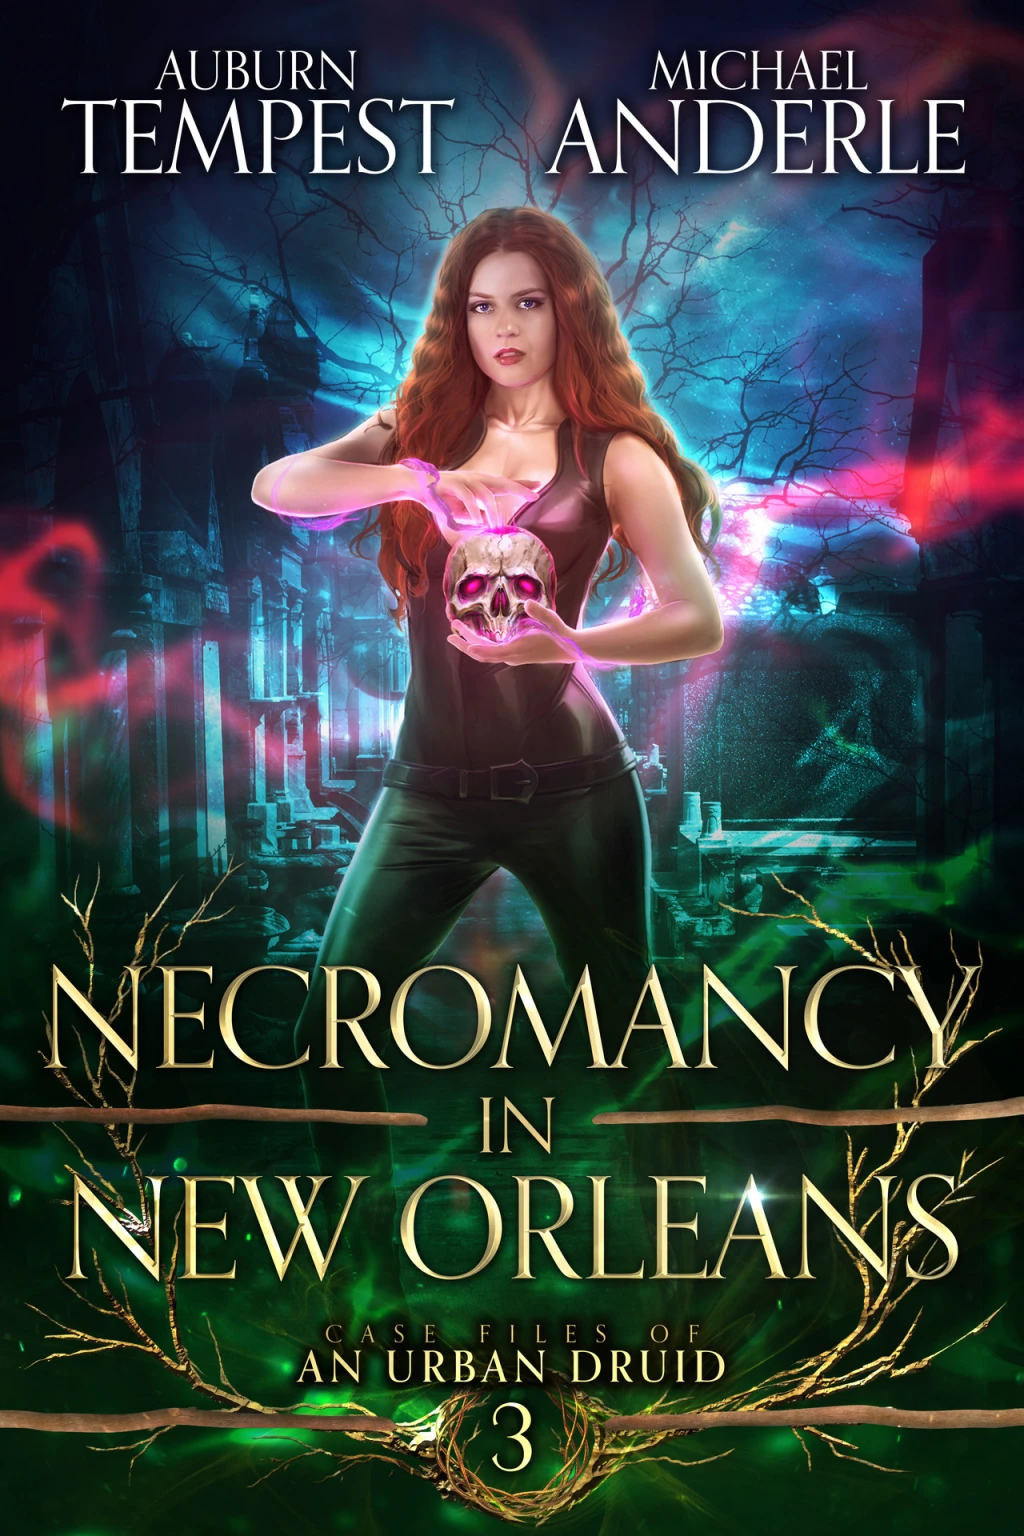 Necromancy in New Orleans – A quite good one.